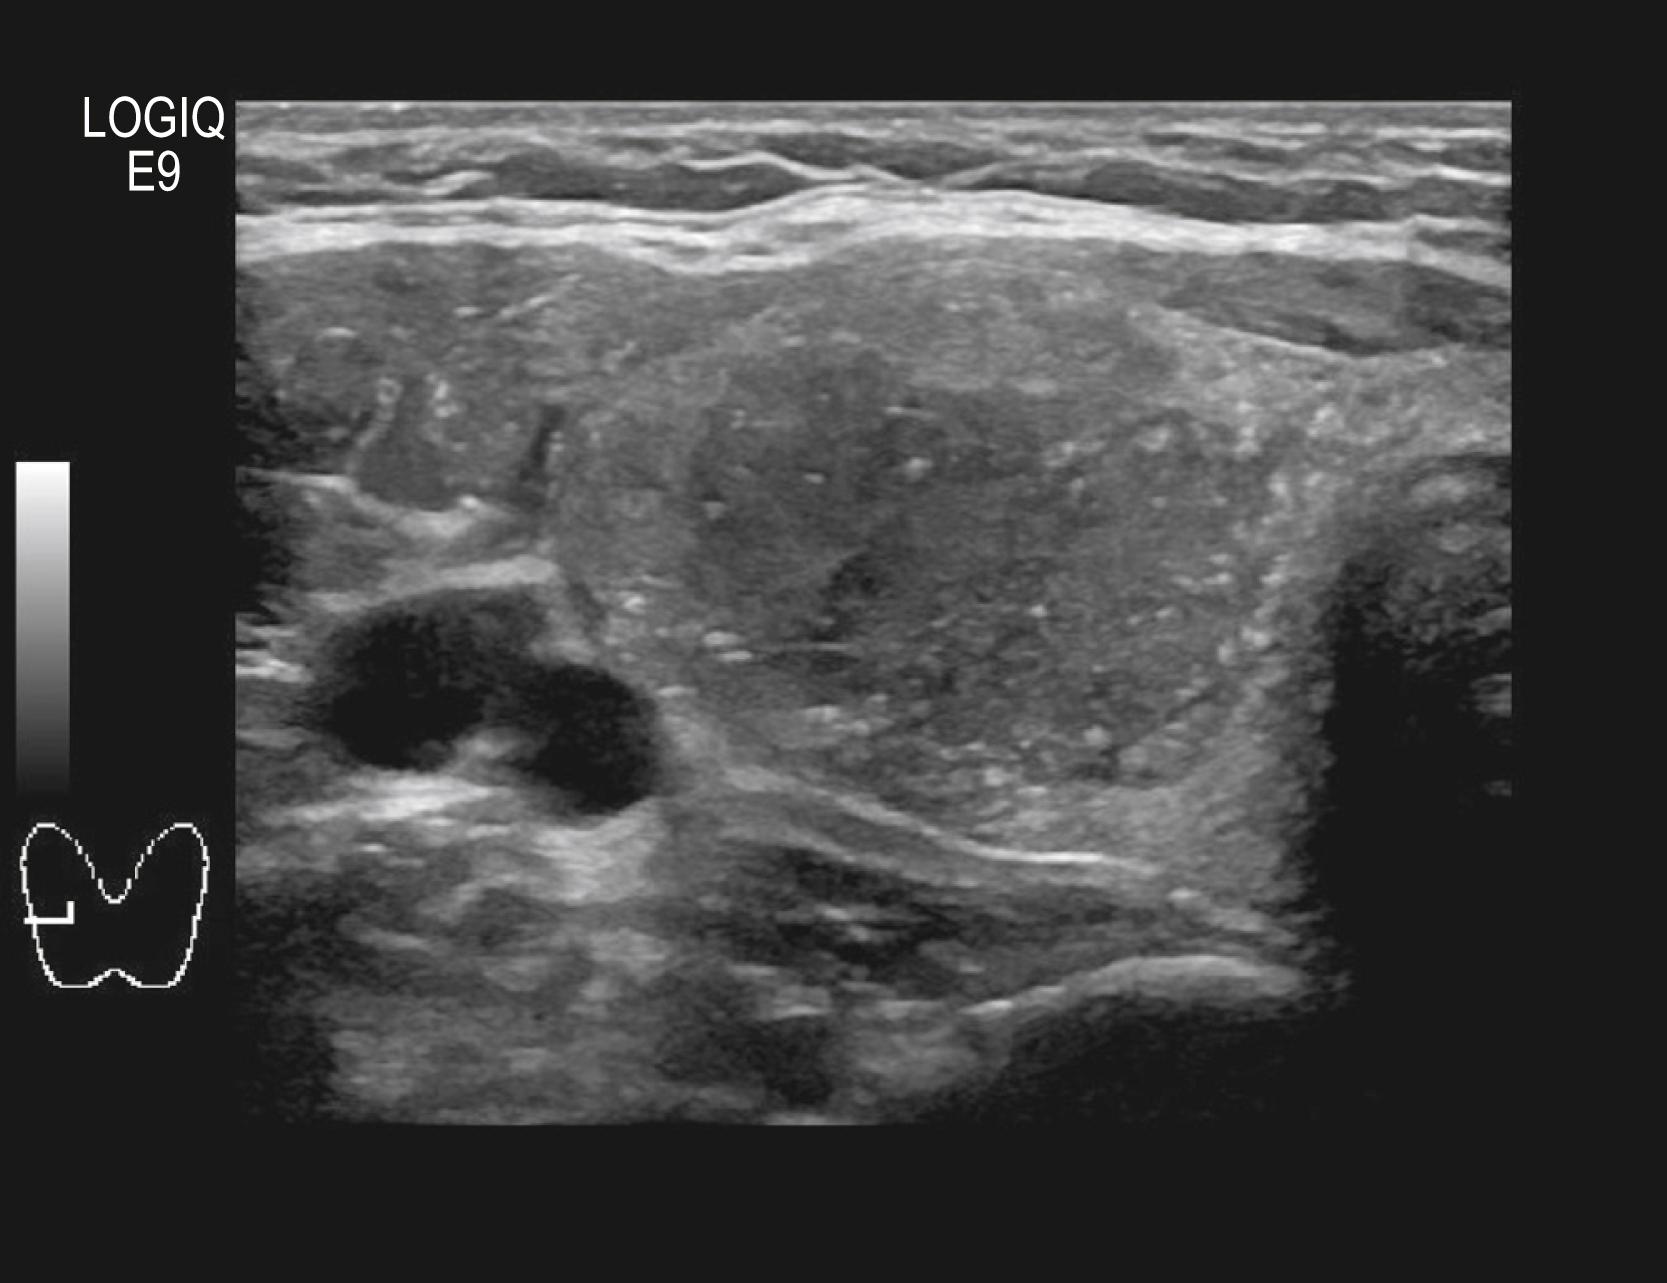 Fig. 75.2, A teenager presented with a large right thyroid mass that was found to be papillary cancer. Ultrasound features that are suggestive of thyroid malignancy include hypoechogenicities, irregular margins, and increased intranodular blood flow.